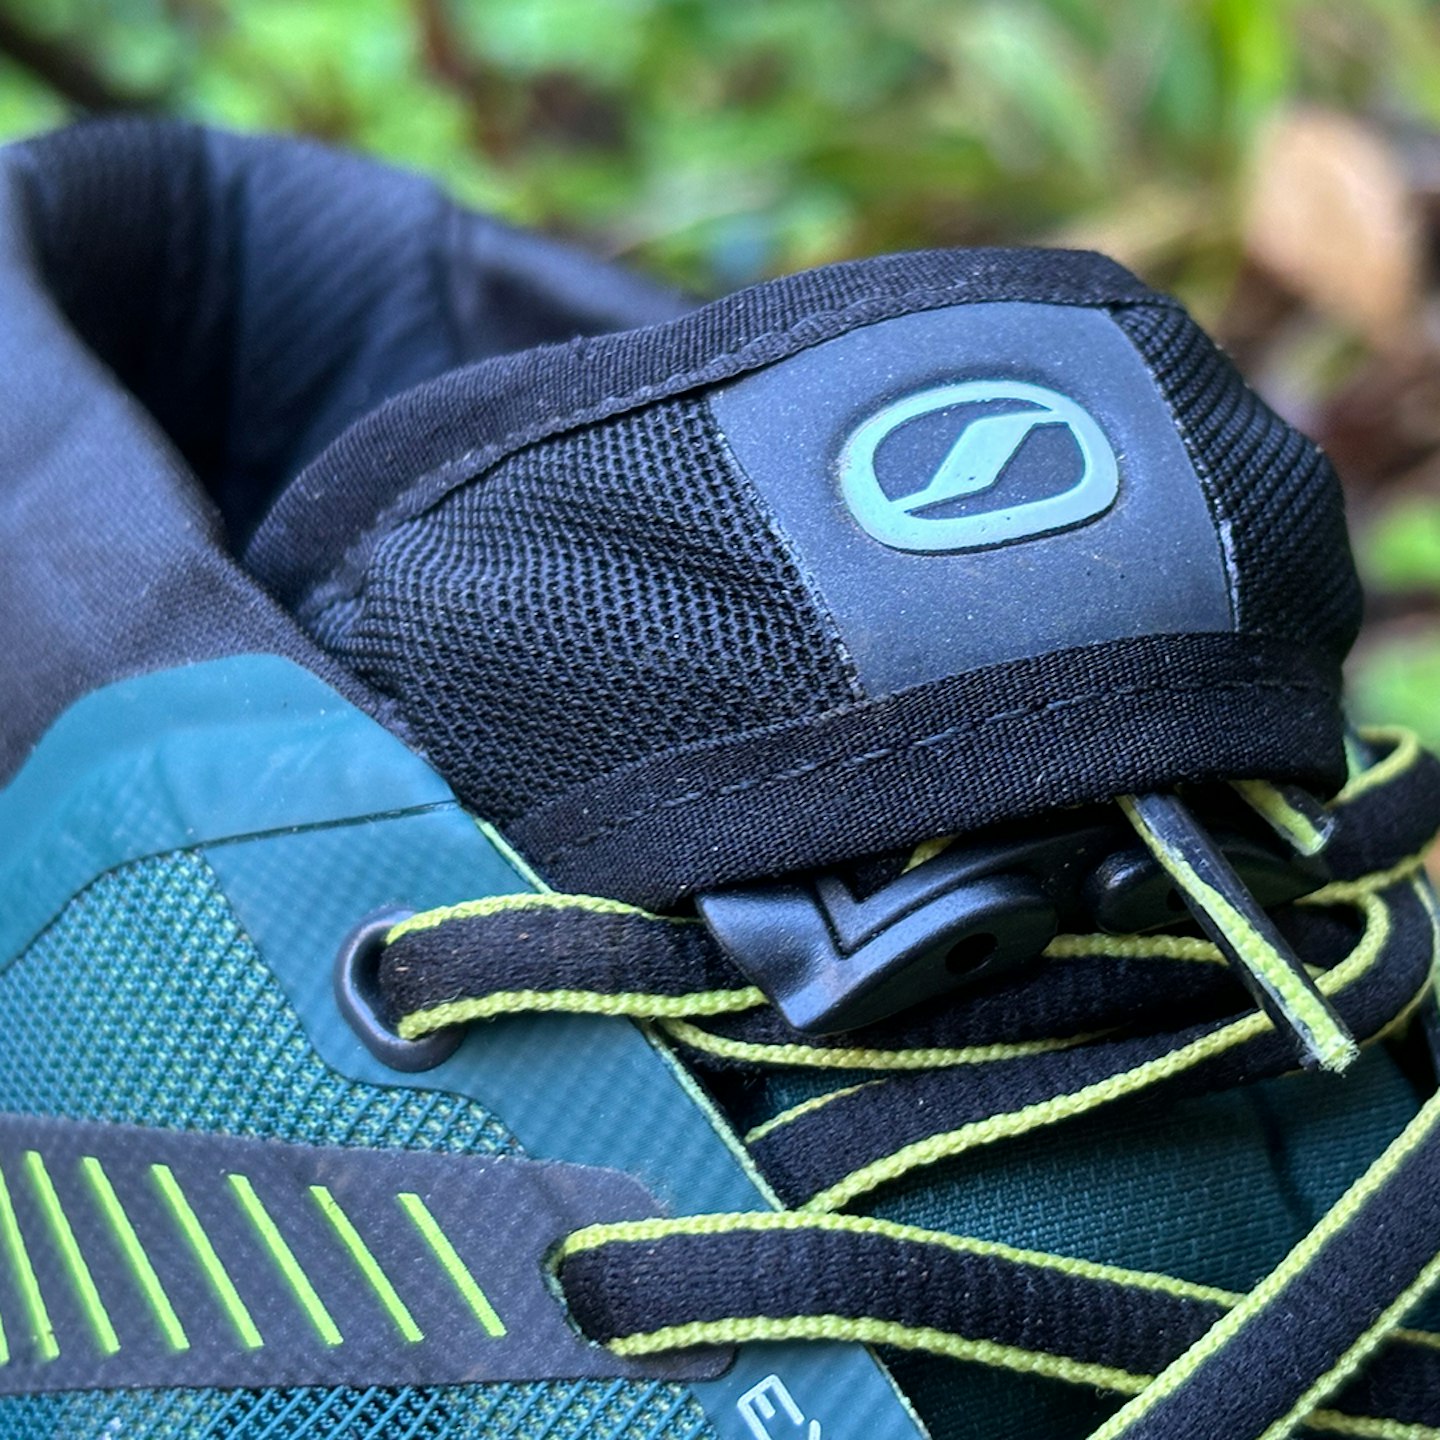 Scarpa Spin ST trail and fell running shoe laces tucked into tongue